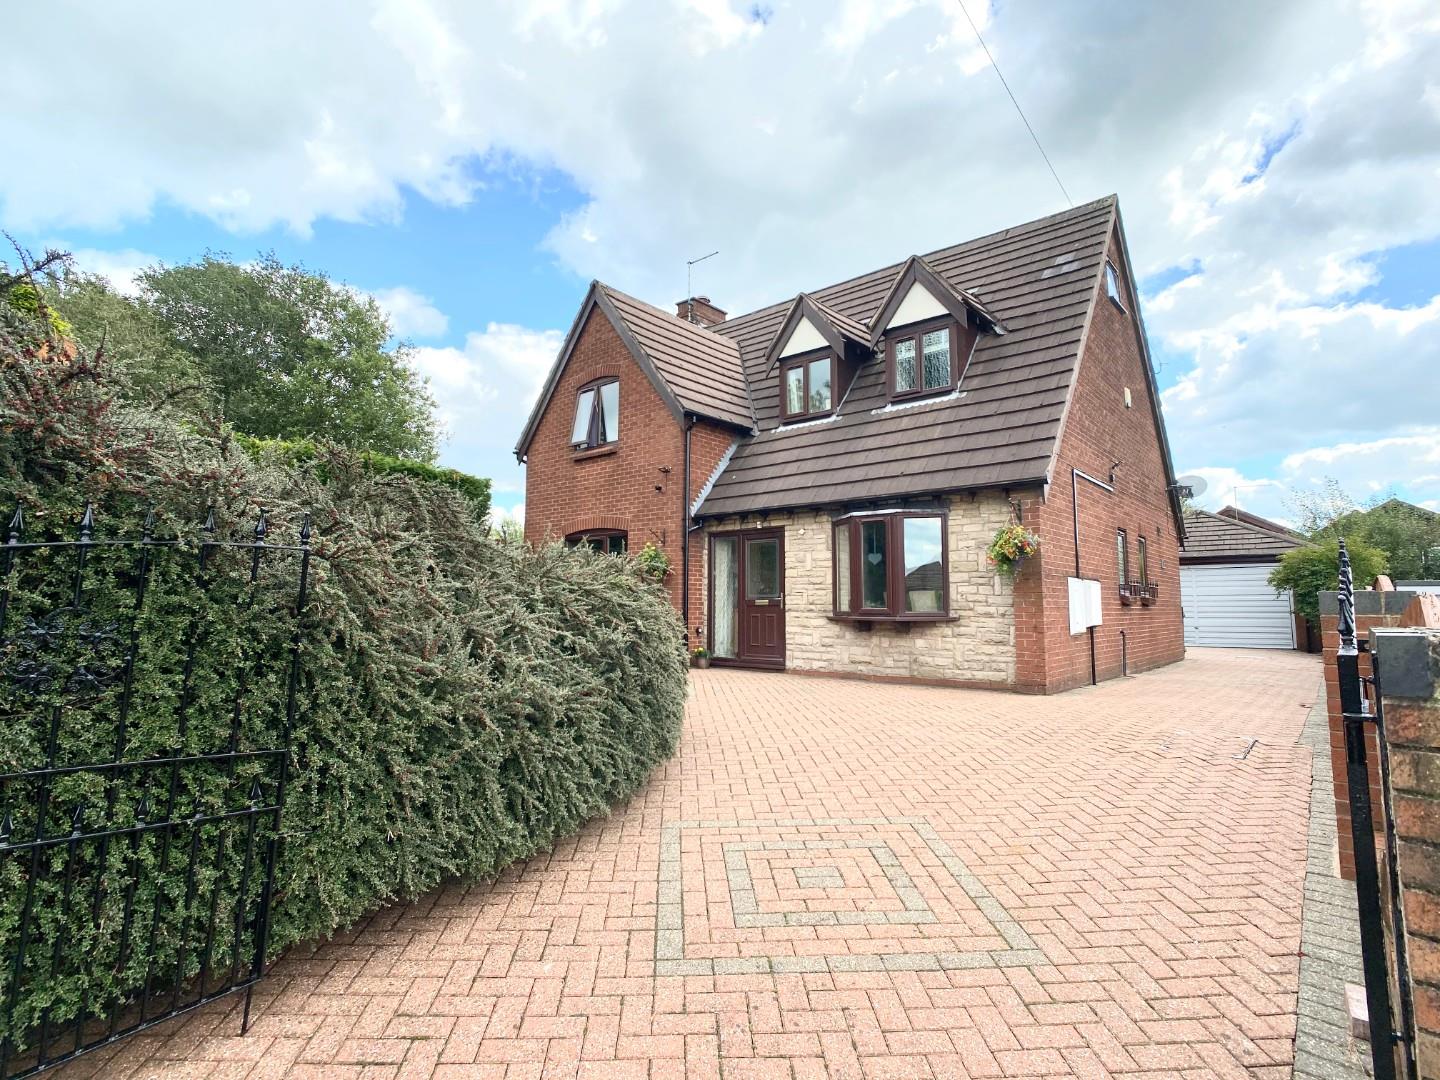 5 bed detached house for sale in Hillside Road, Stoke-On-Trent - Property Image 1